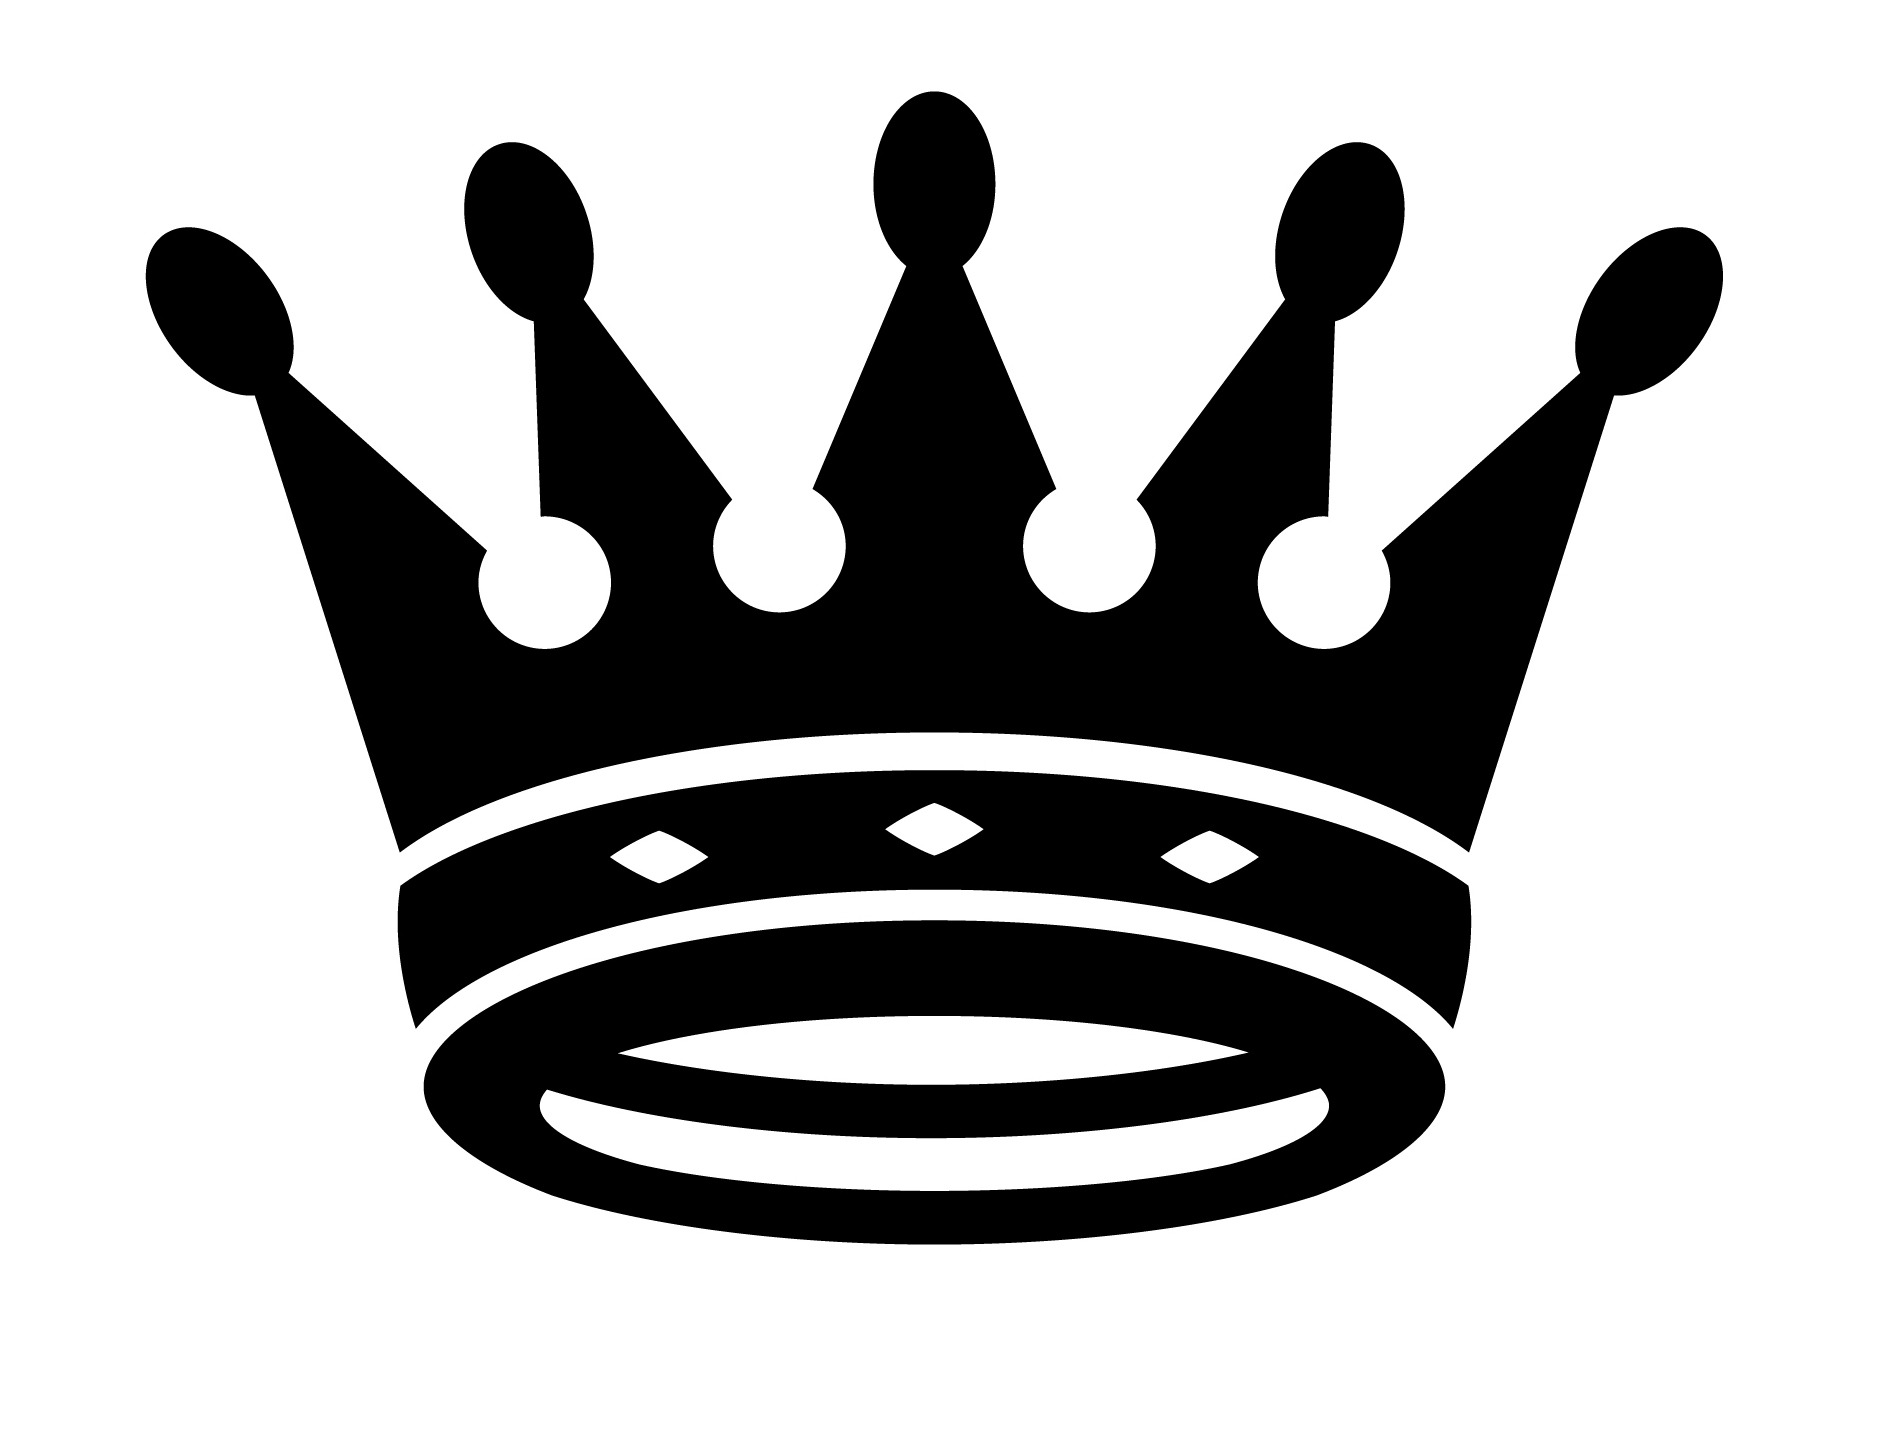 queen crown clipart black and white - Clipground